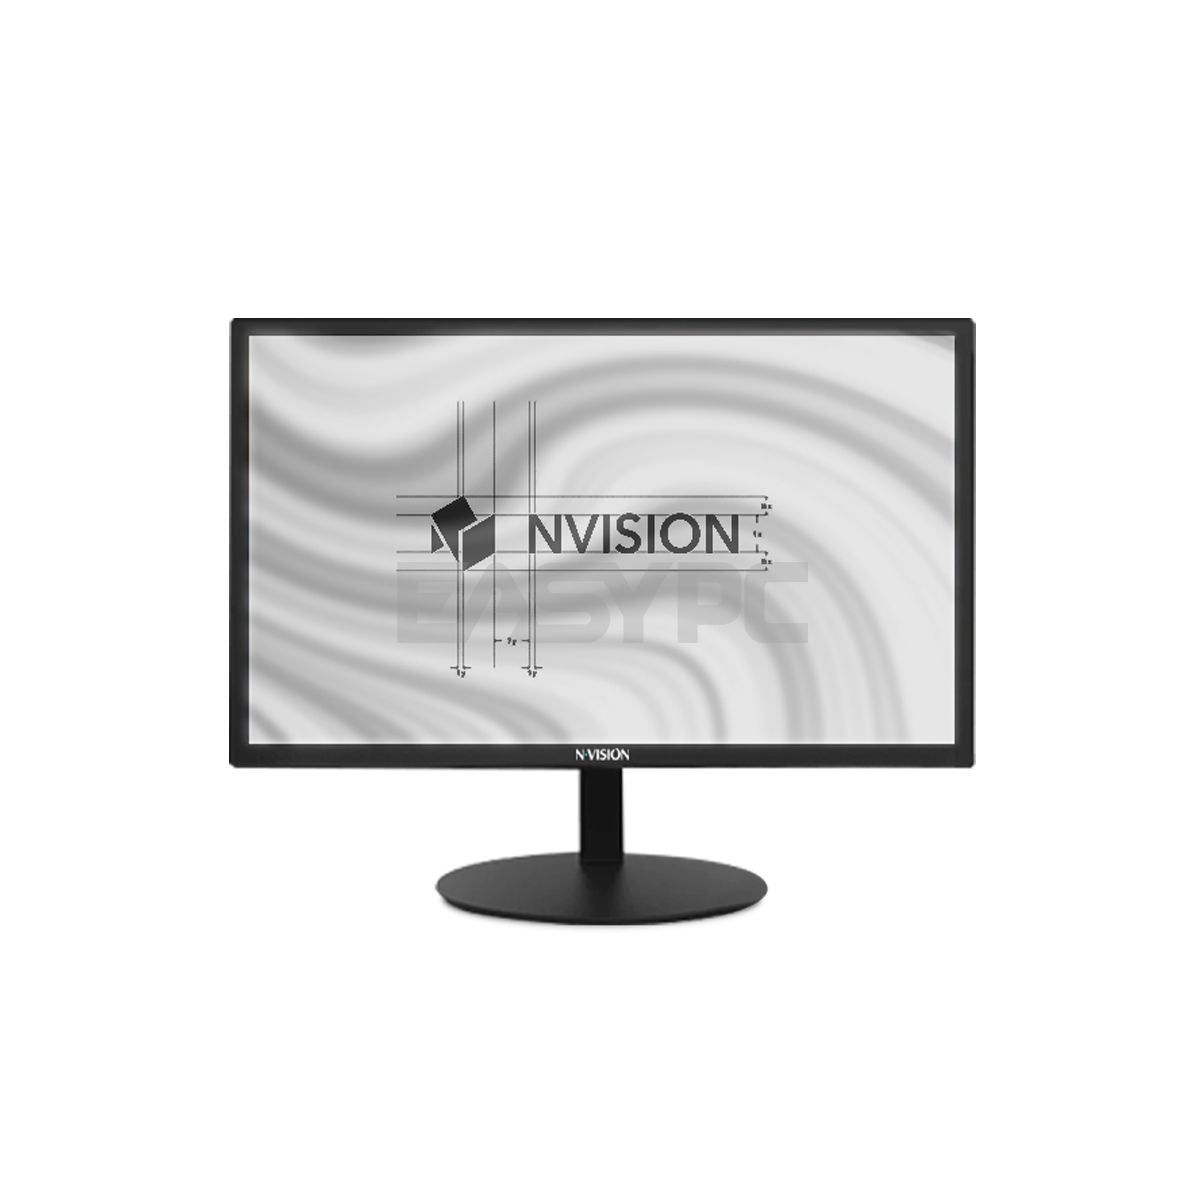 Nvision H22V5-a